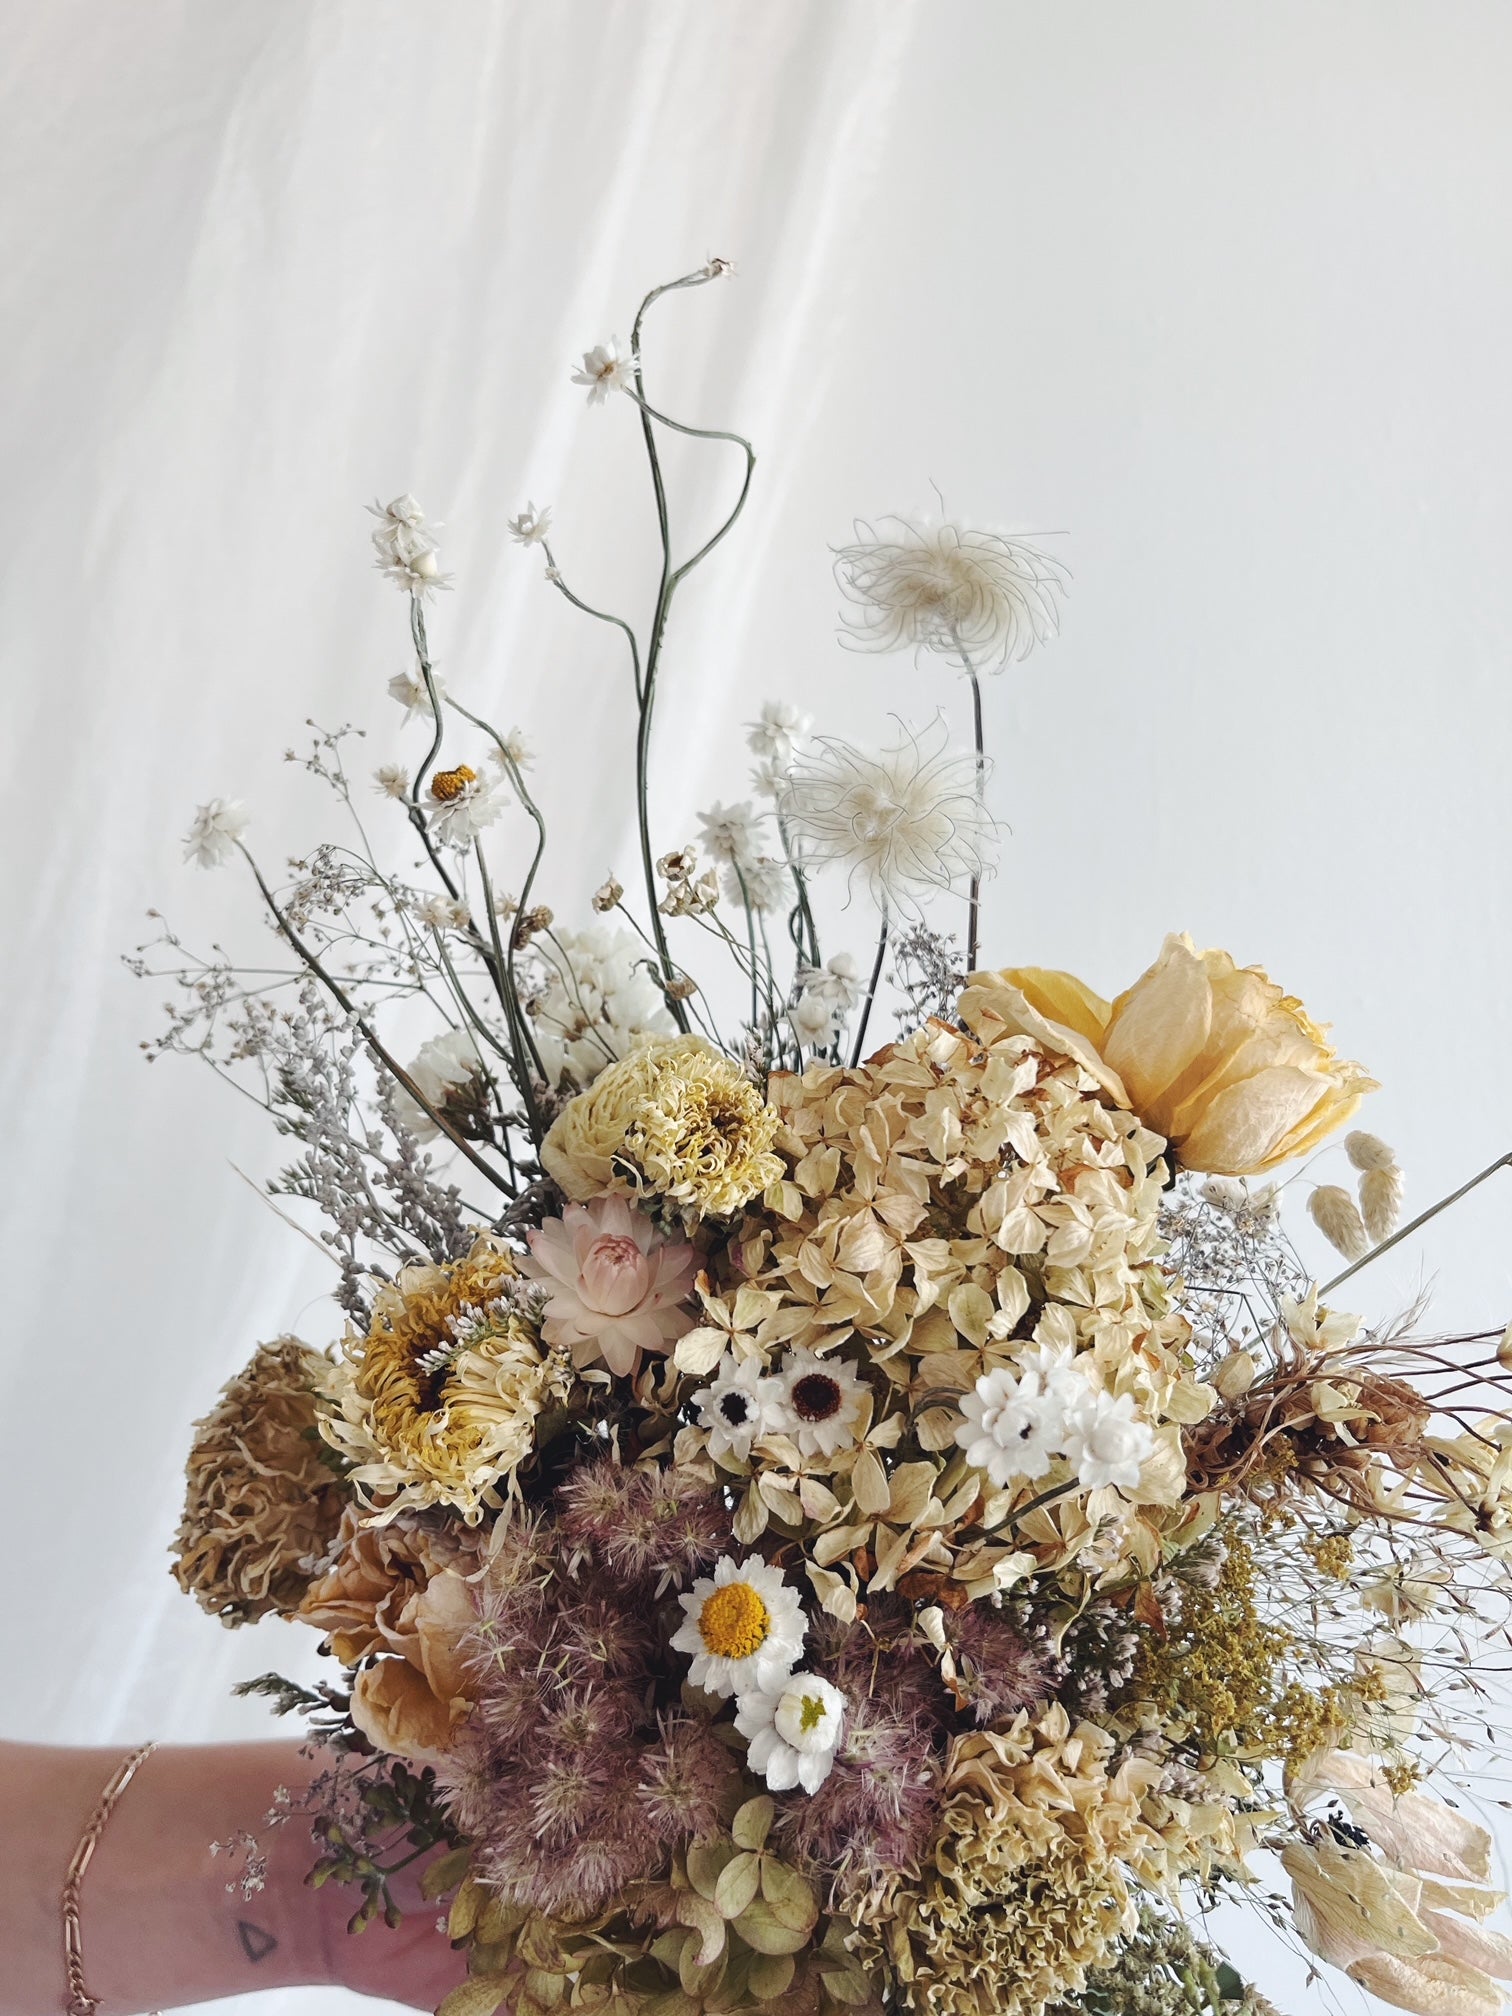 Flower Delivery Vancouver-The Dried Bridal Bouquet-Wedding Flowers-Florist-The Wild Bunch Flower Shop